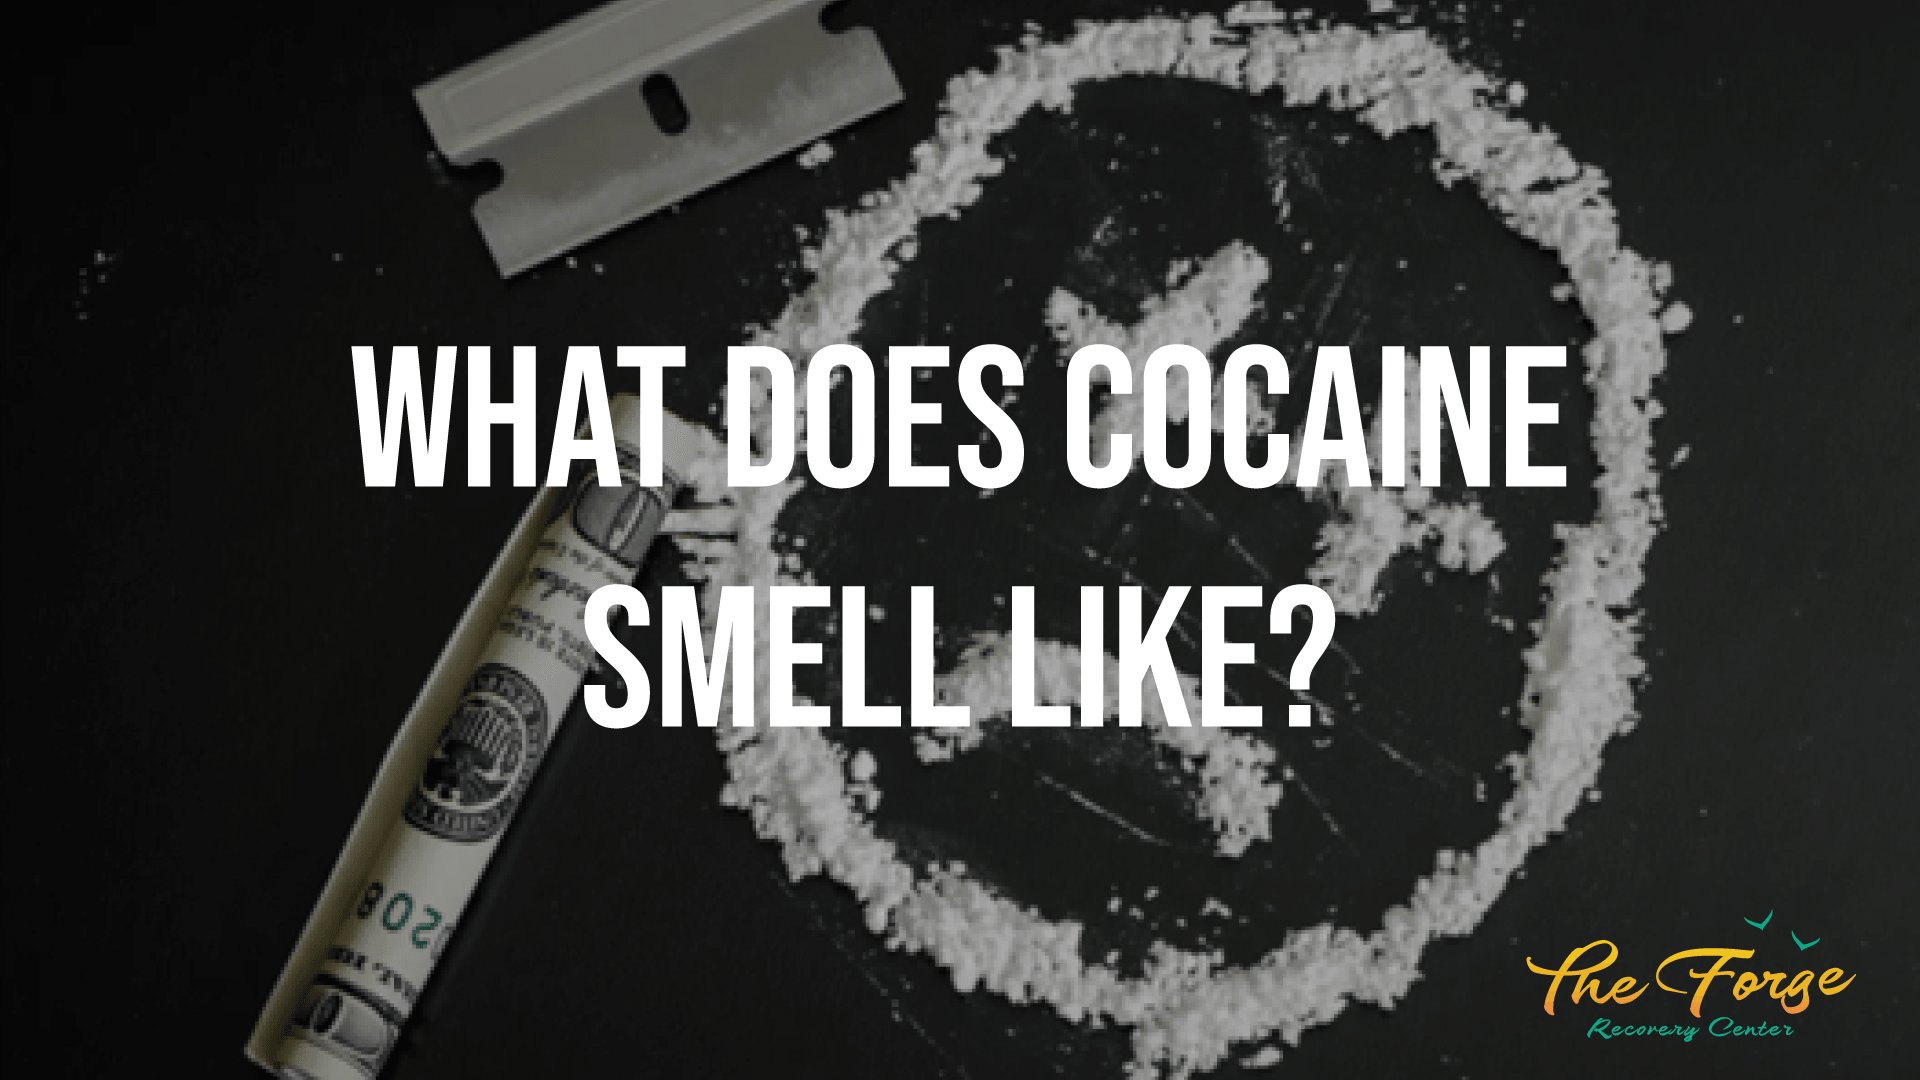 Recognizing Cocaine: What Does Cocaine Smell Like?